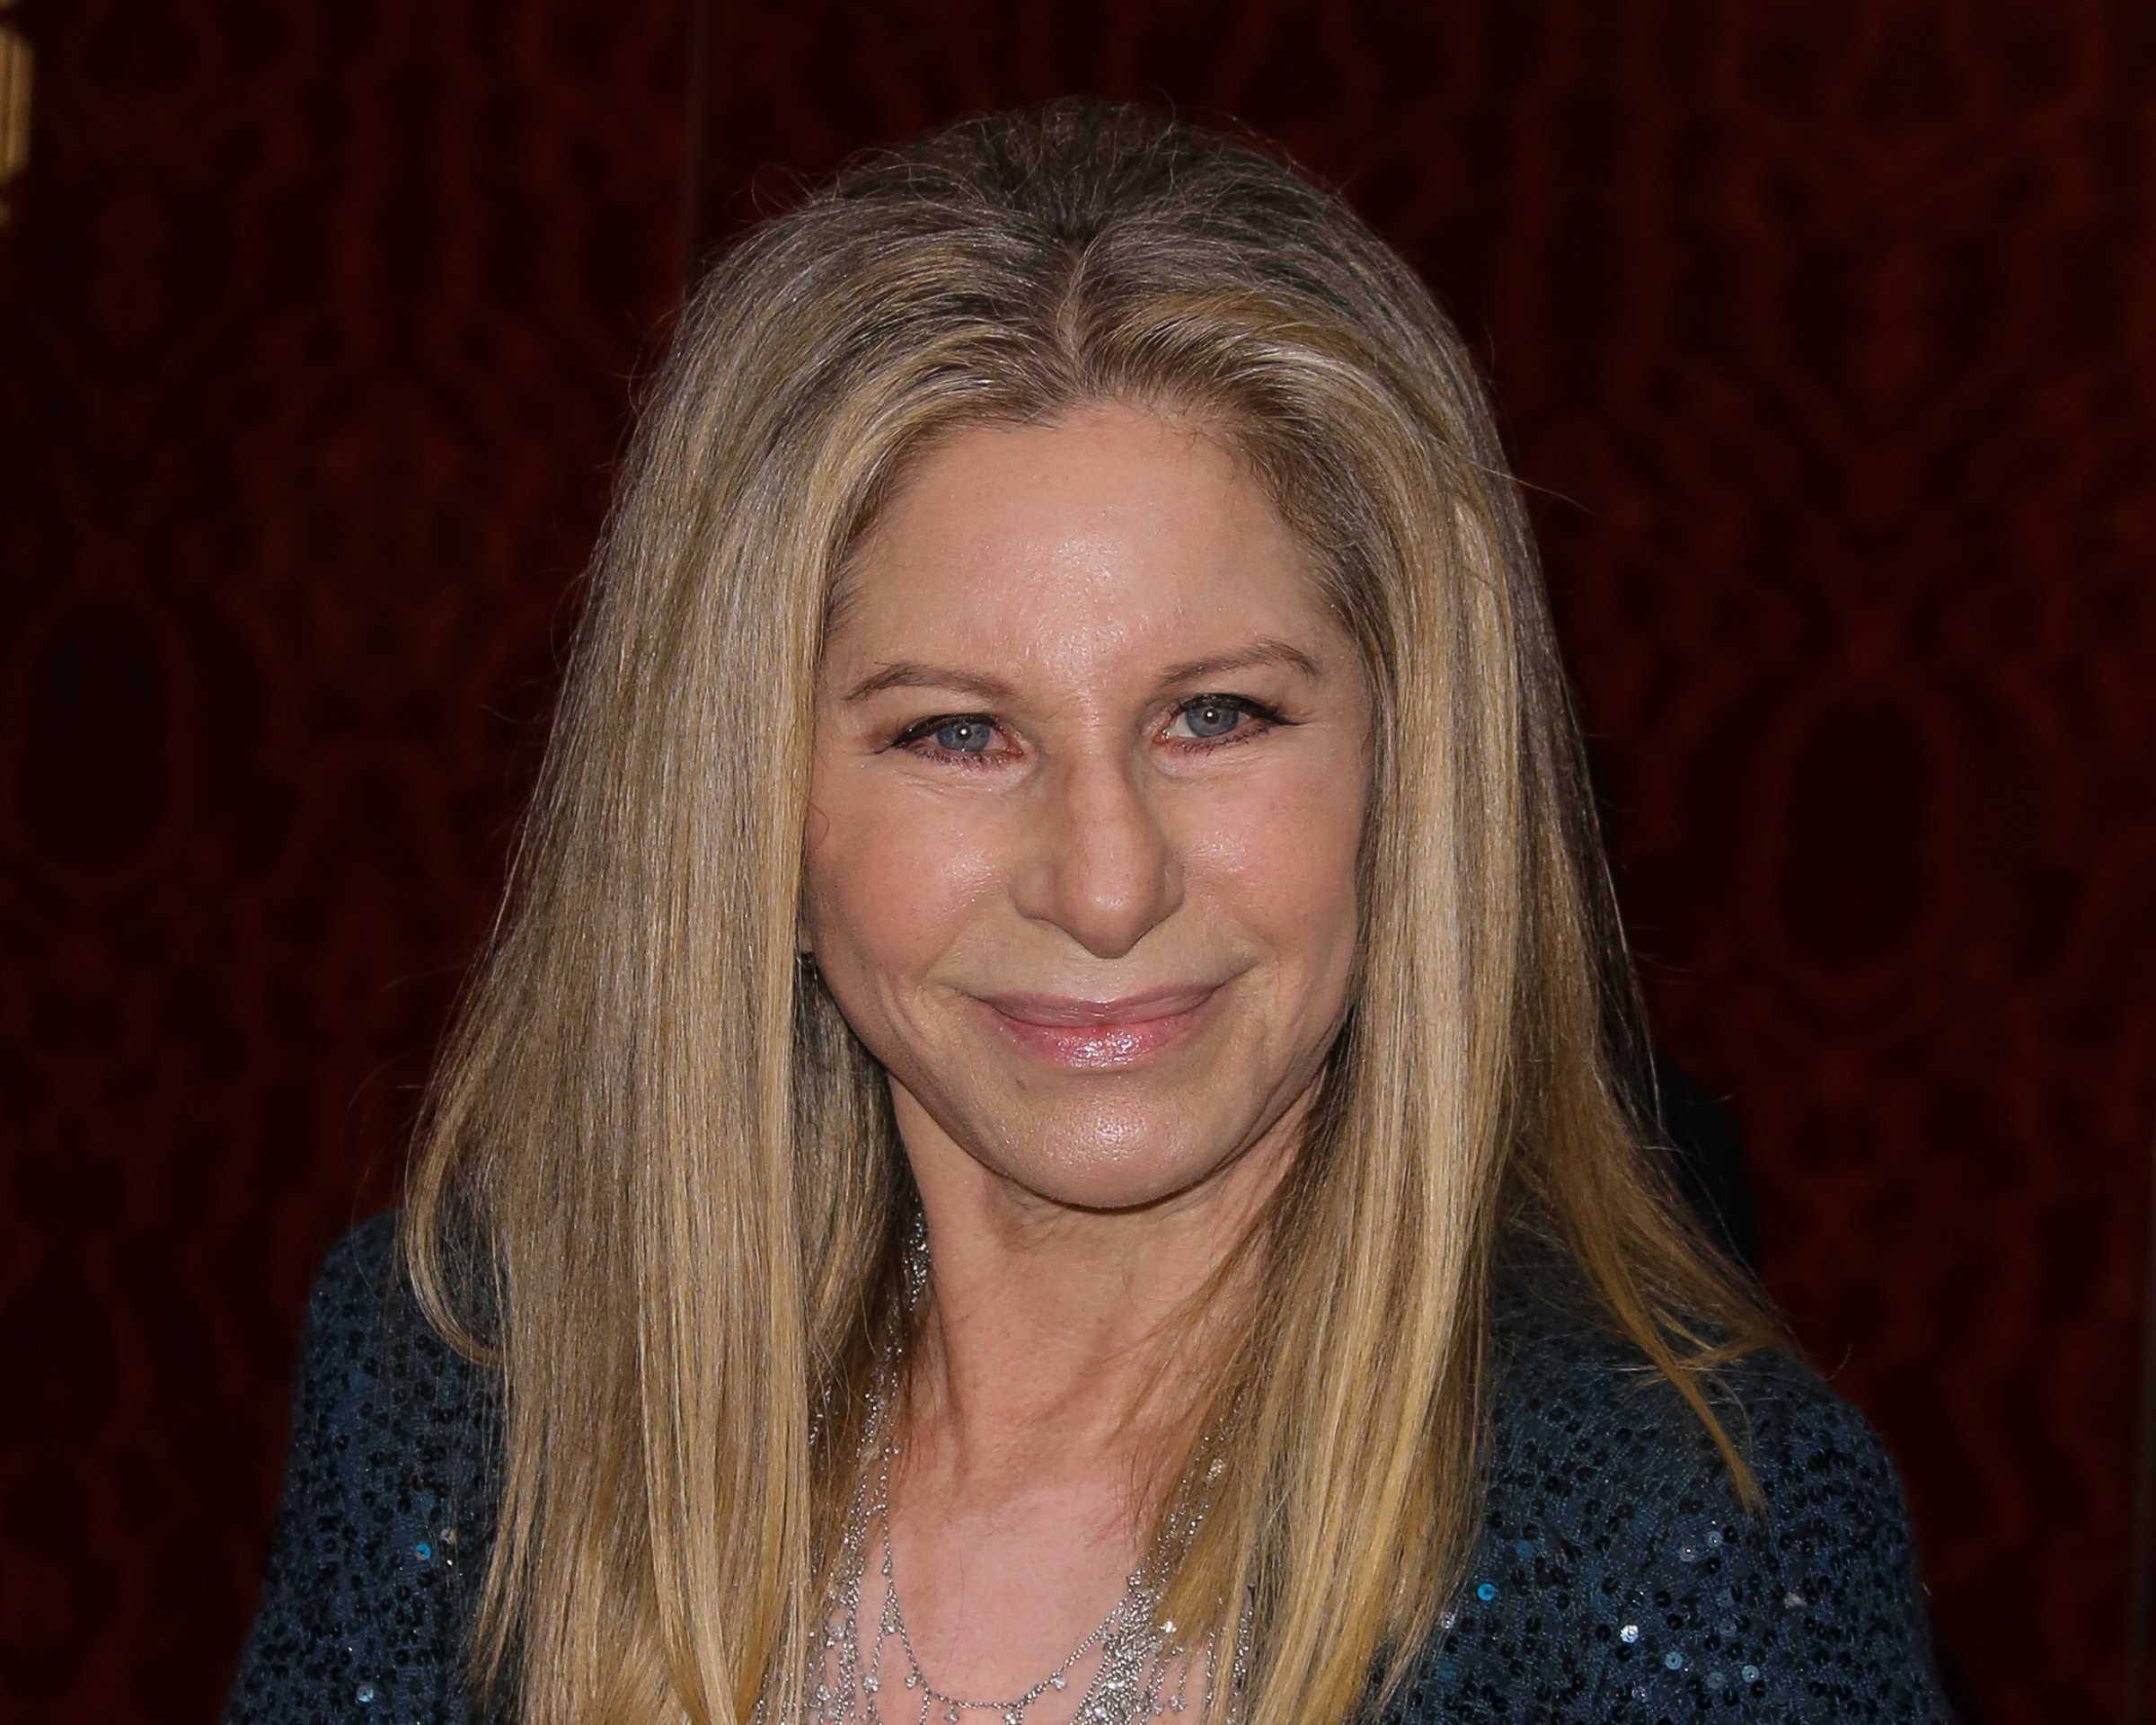 Actress Barbra Streisand attends the American Society Of Cinematographers 29th Annual Outstanding Achievement Awards at the Hyatt Regency Century Plaza on February 15, 2015 in Century City, California.